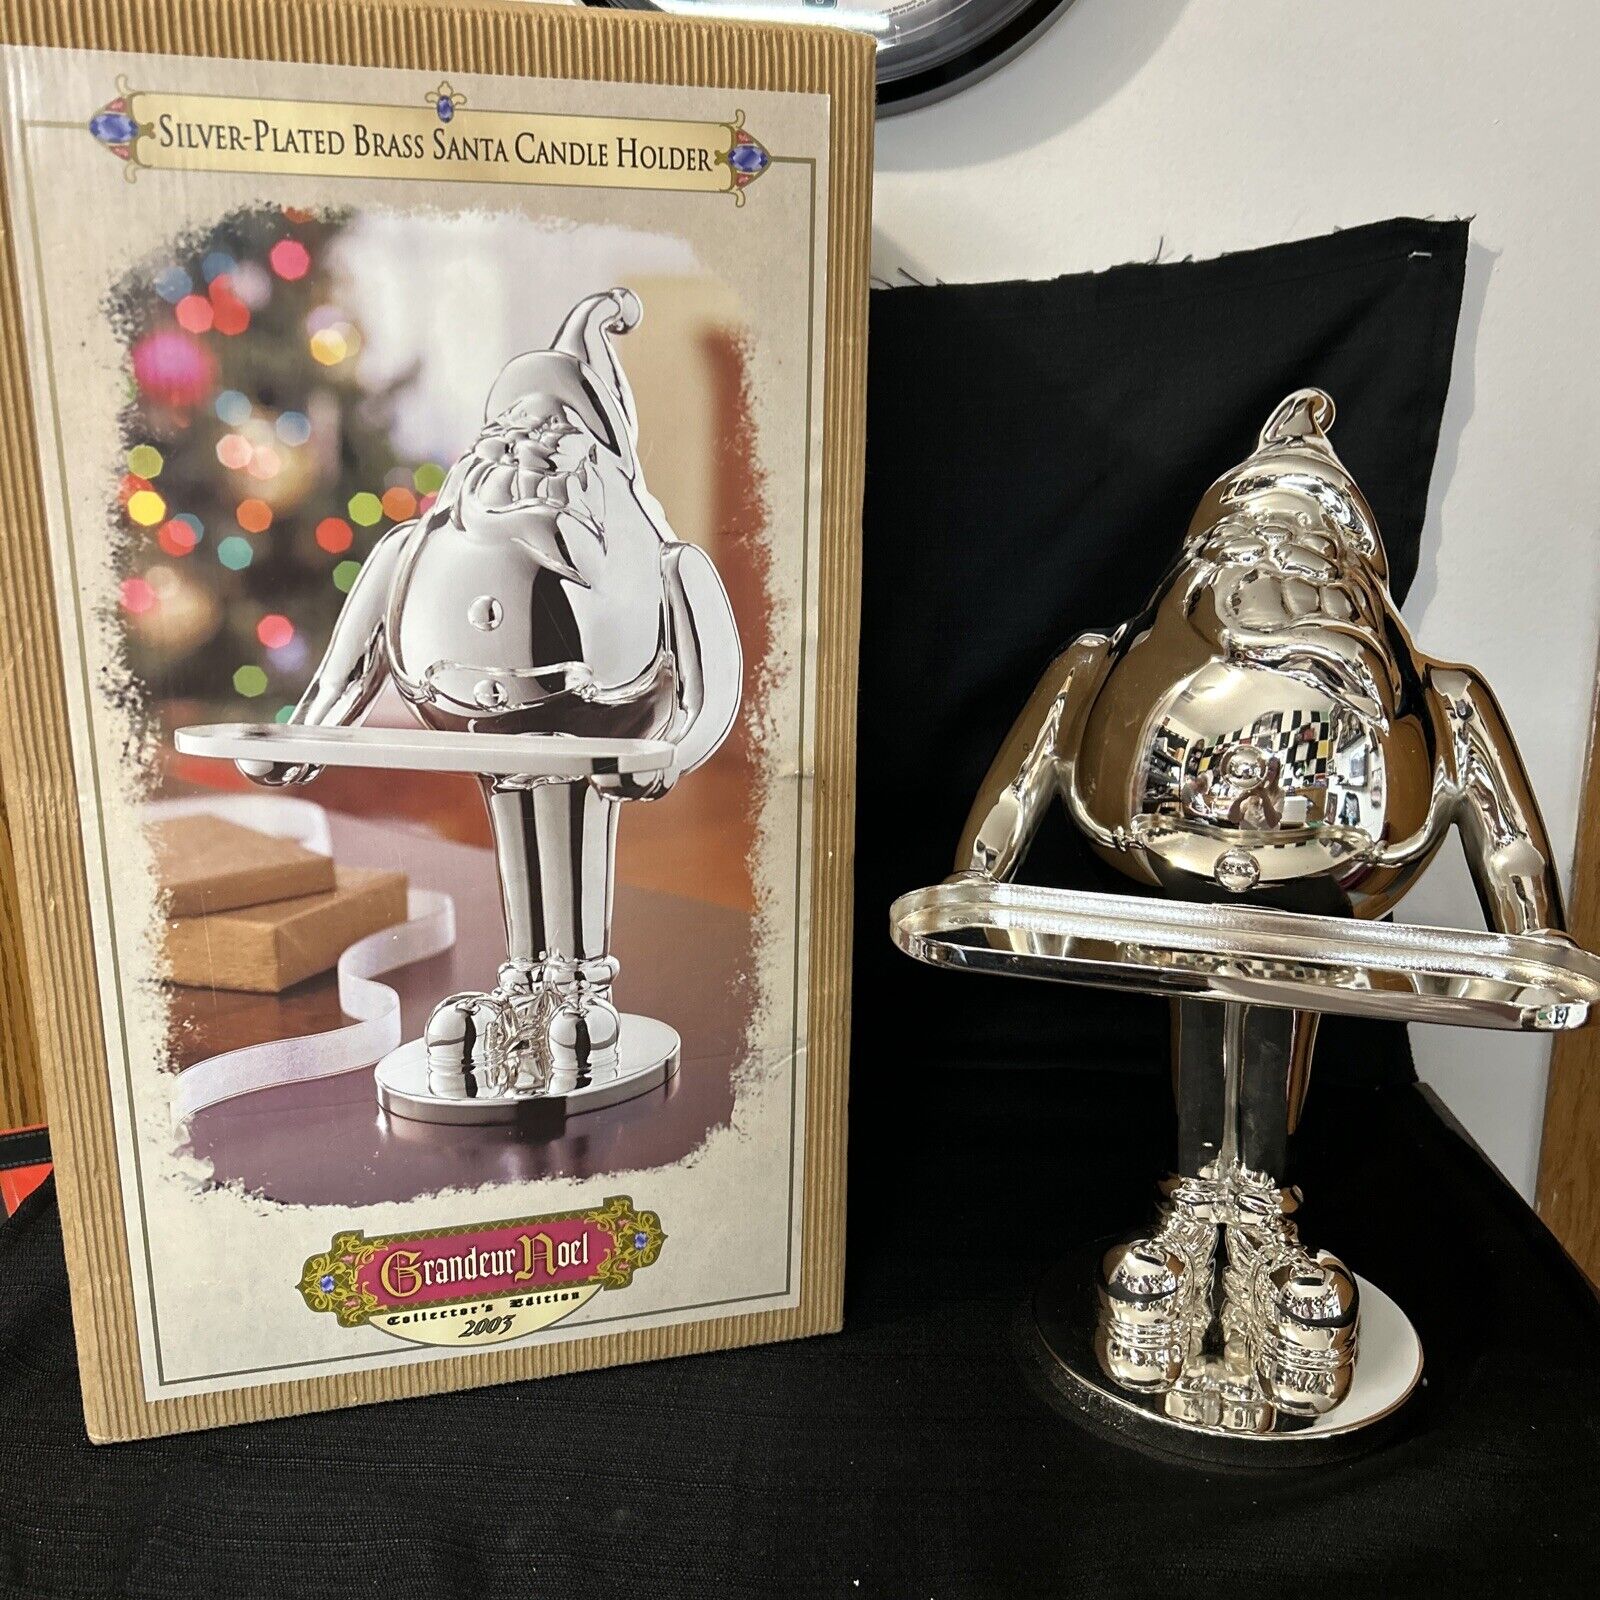 Silver-Plated Brass Santa Candle Holder